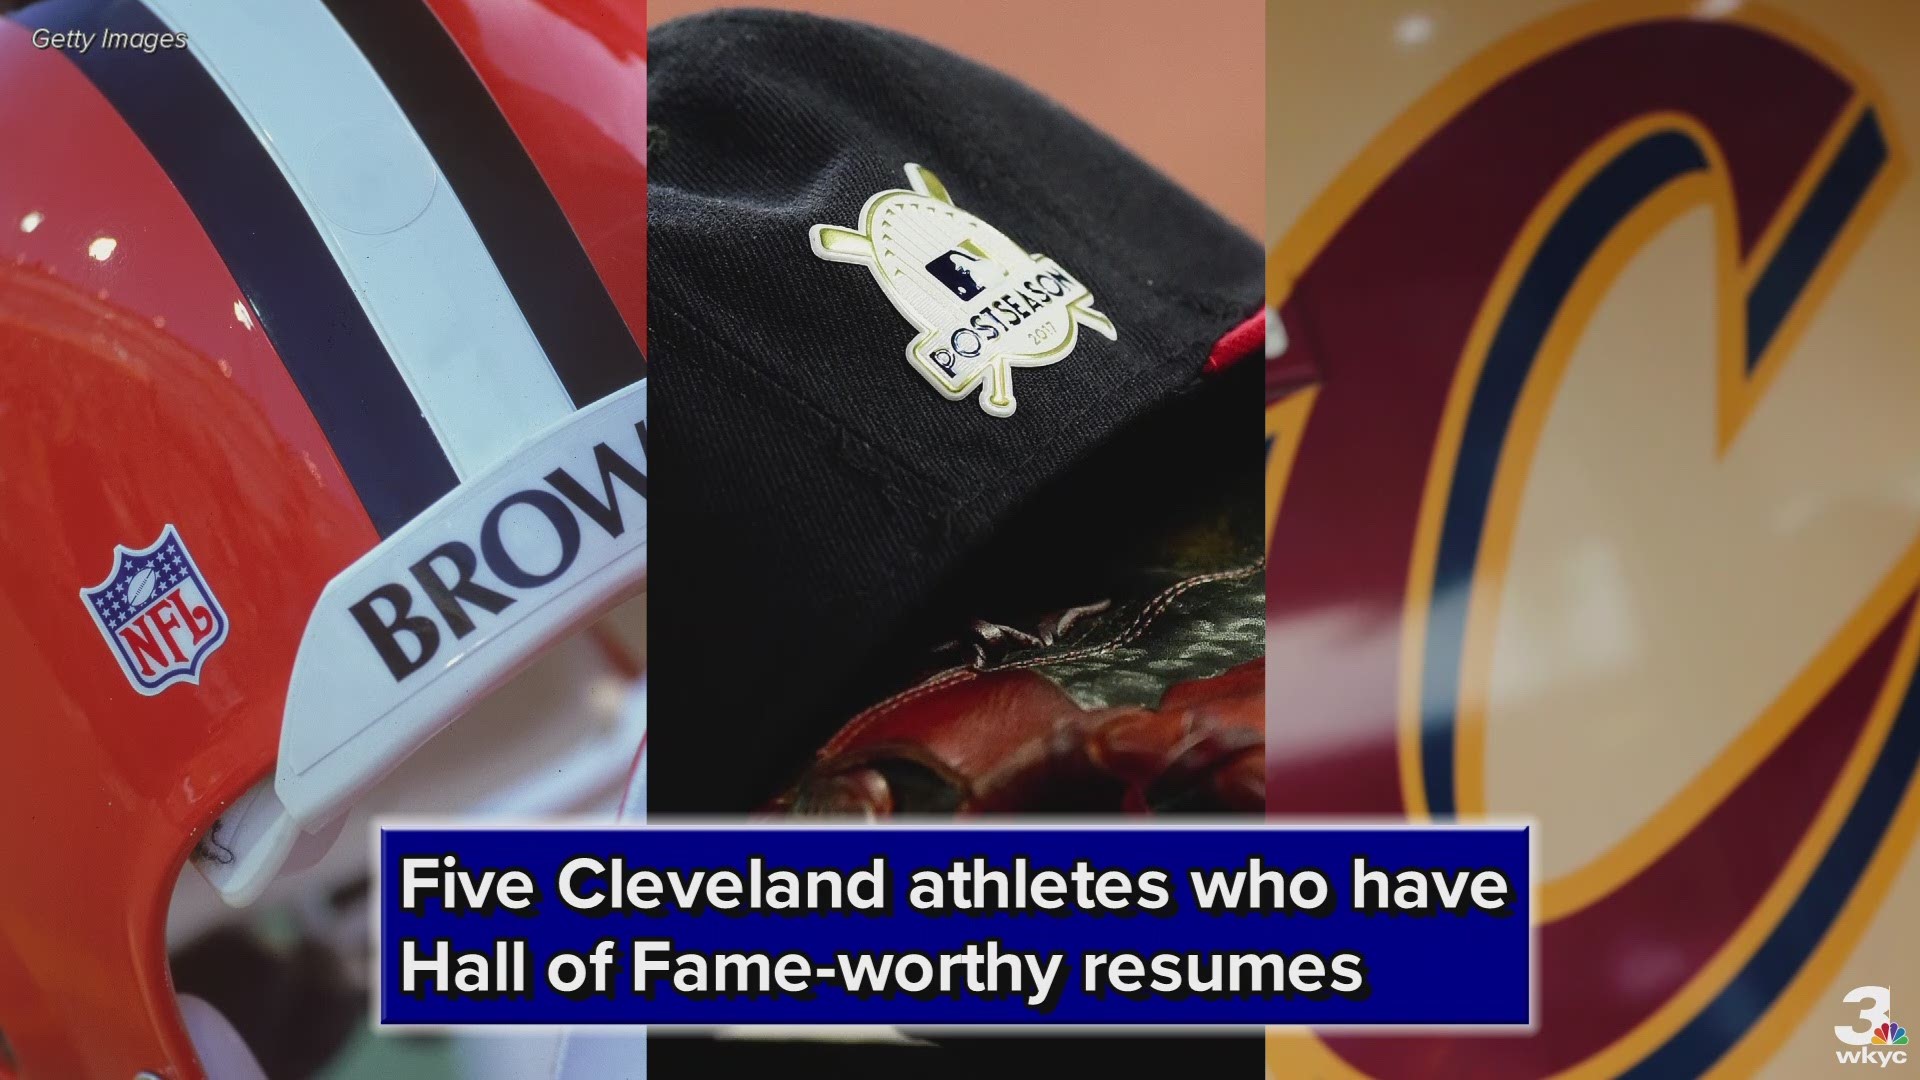 Here is a look at five current or former Cleveland athletes with resumes worthy of selection into their respective sports Hall of Fame.